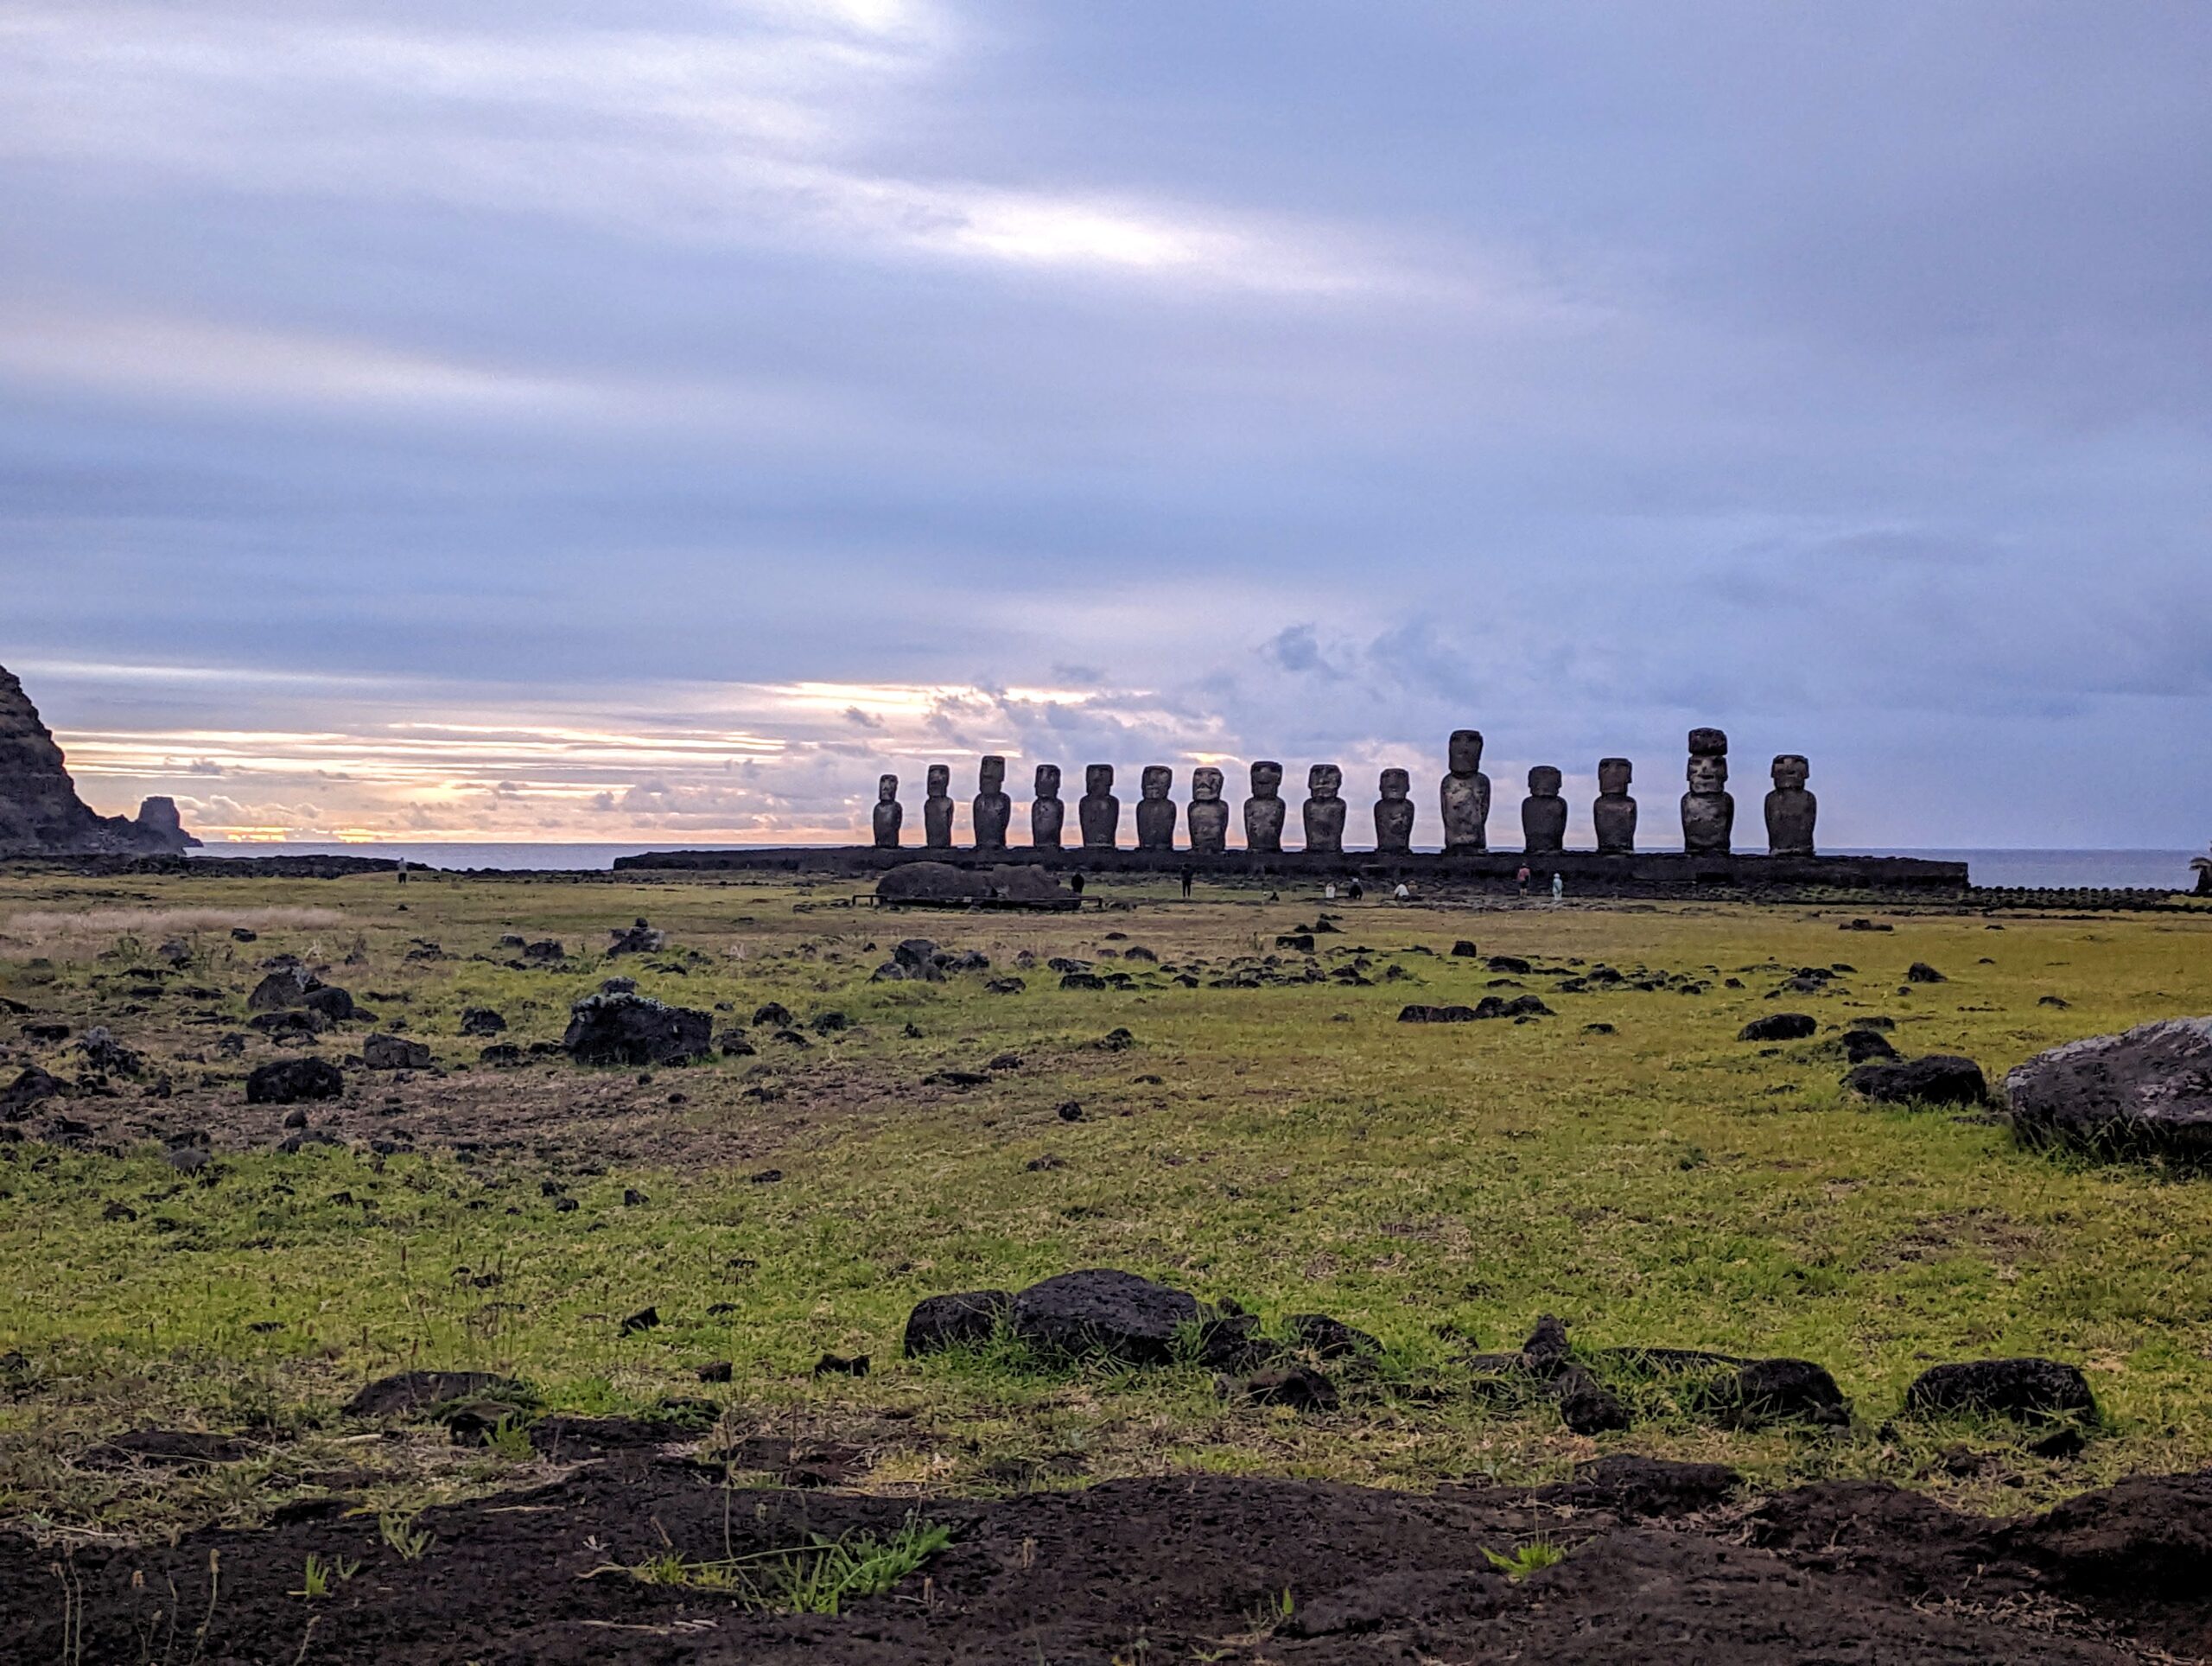 A picture of the Moai statues on Easter Island at sunrise.